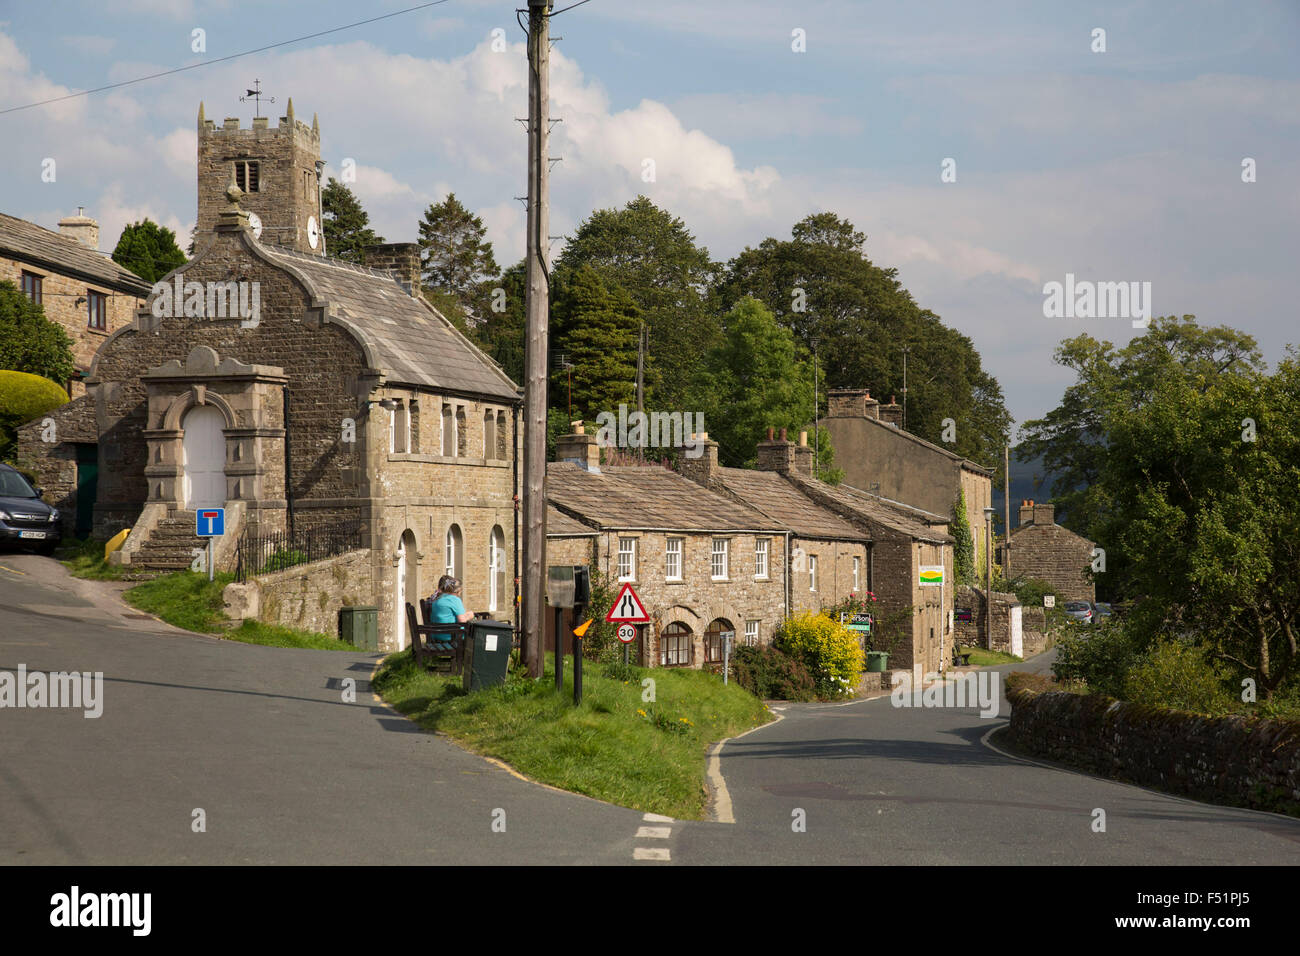 The village church in Muker in Swaledale, which runs broadly from west to east. To the south and east of the ridge a number of smaller dales. Swaledale is a typical limestone Yorkshire dale, with its narrow valley-bottom road. Yorkshire, England, UK. Stock Photo